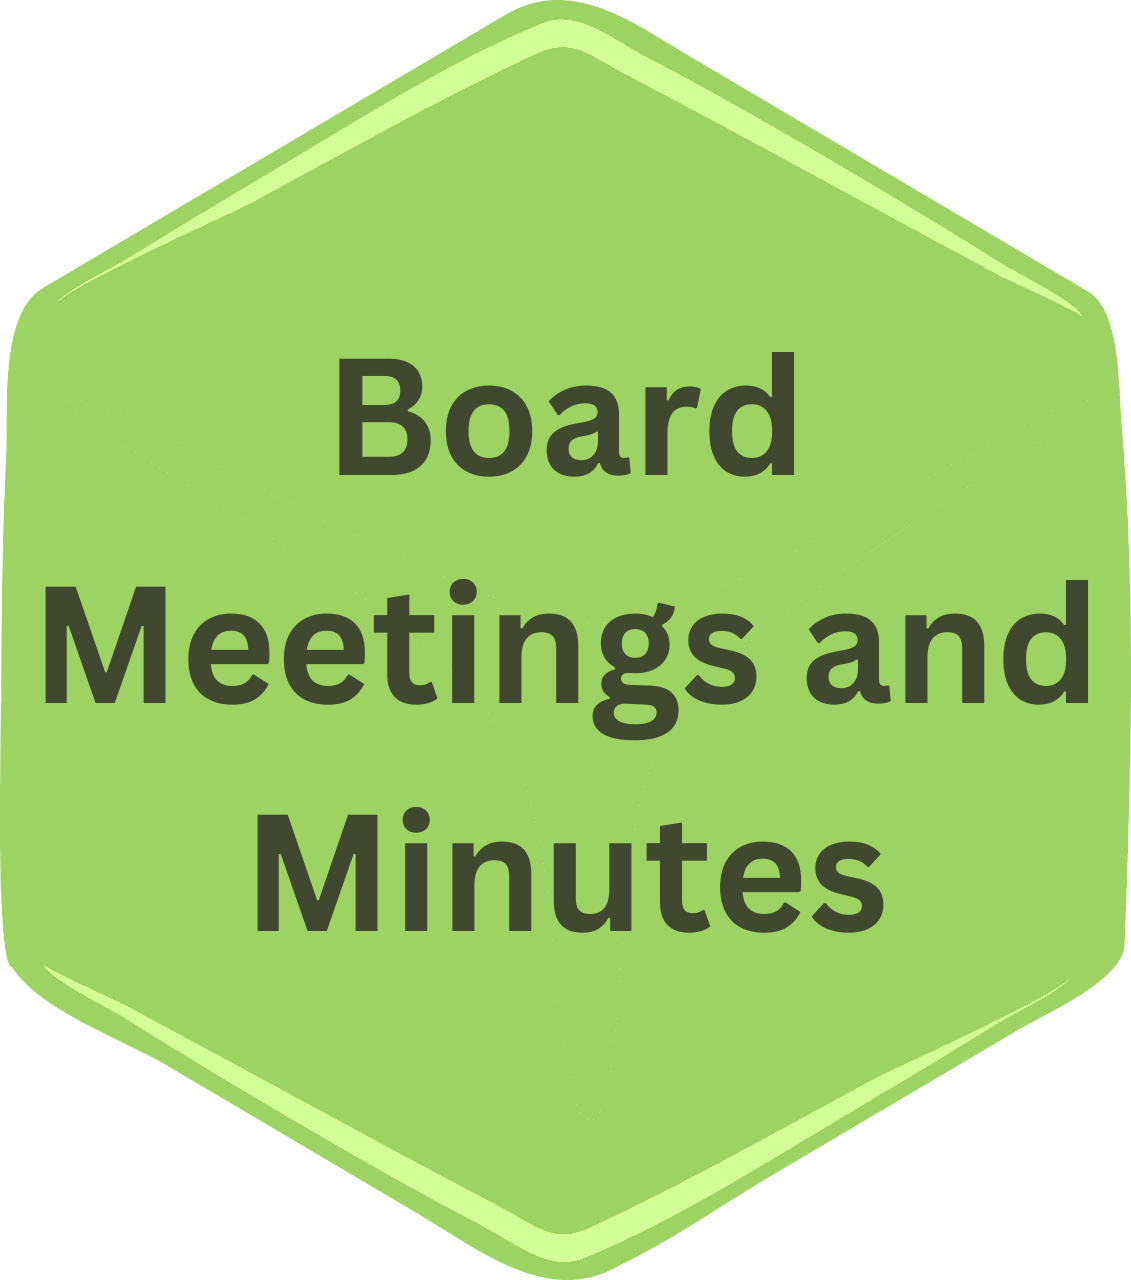 Meetings button to see meeting dates